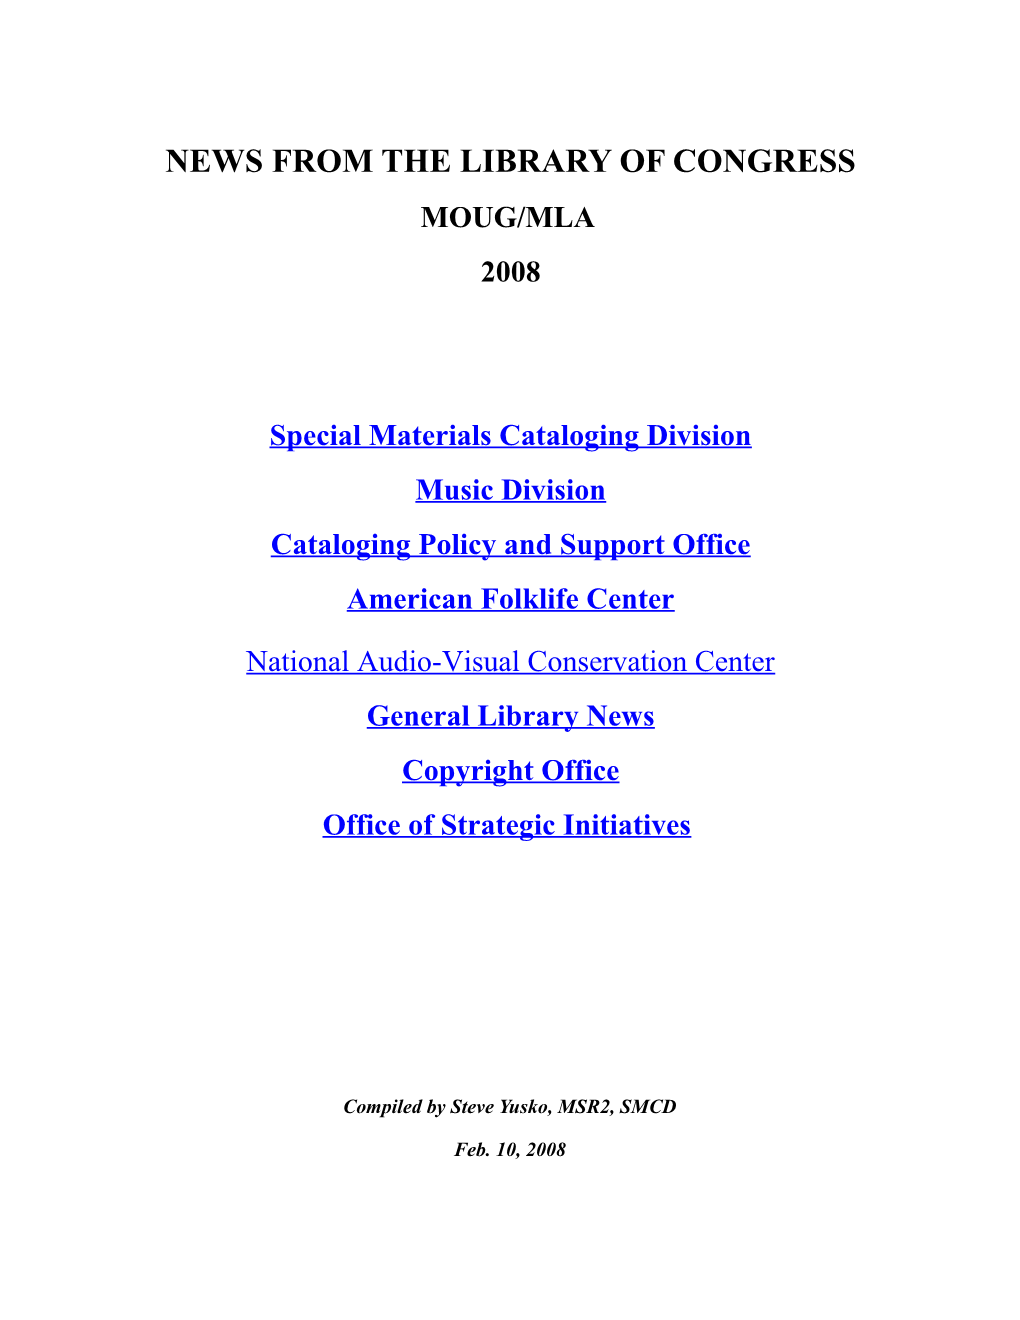 News from the Library of Congress